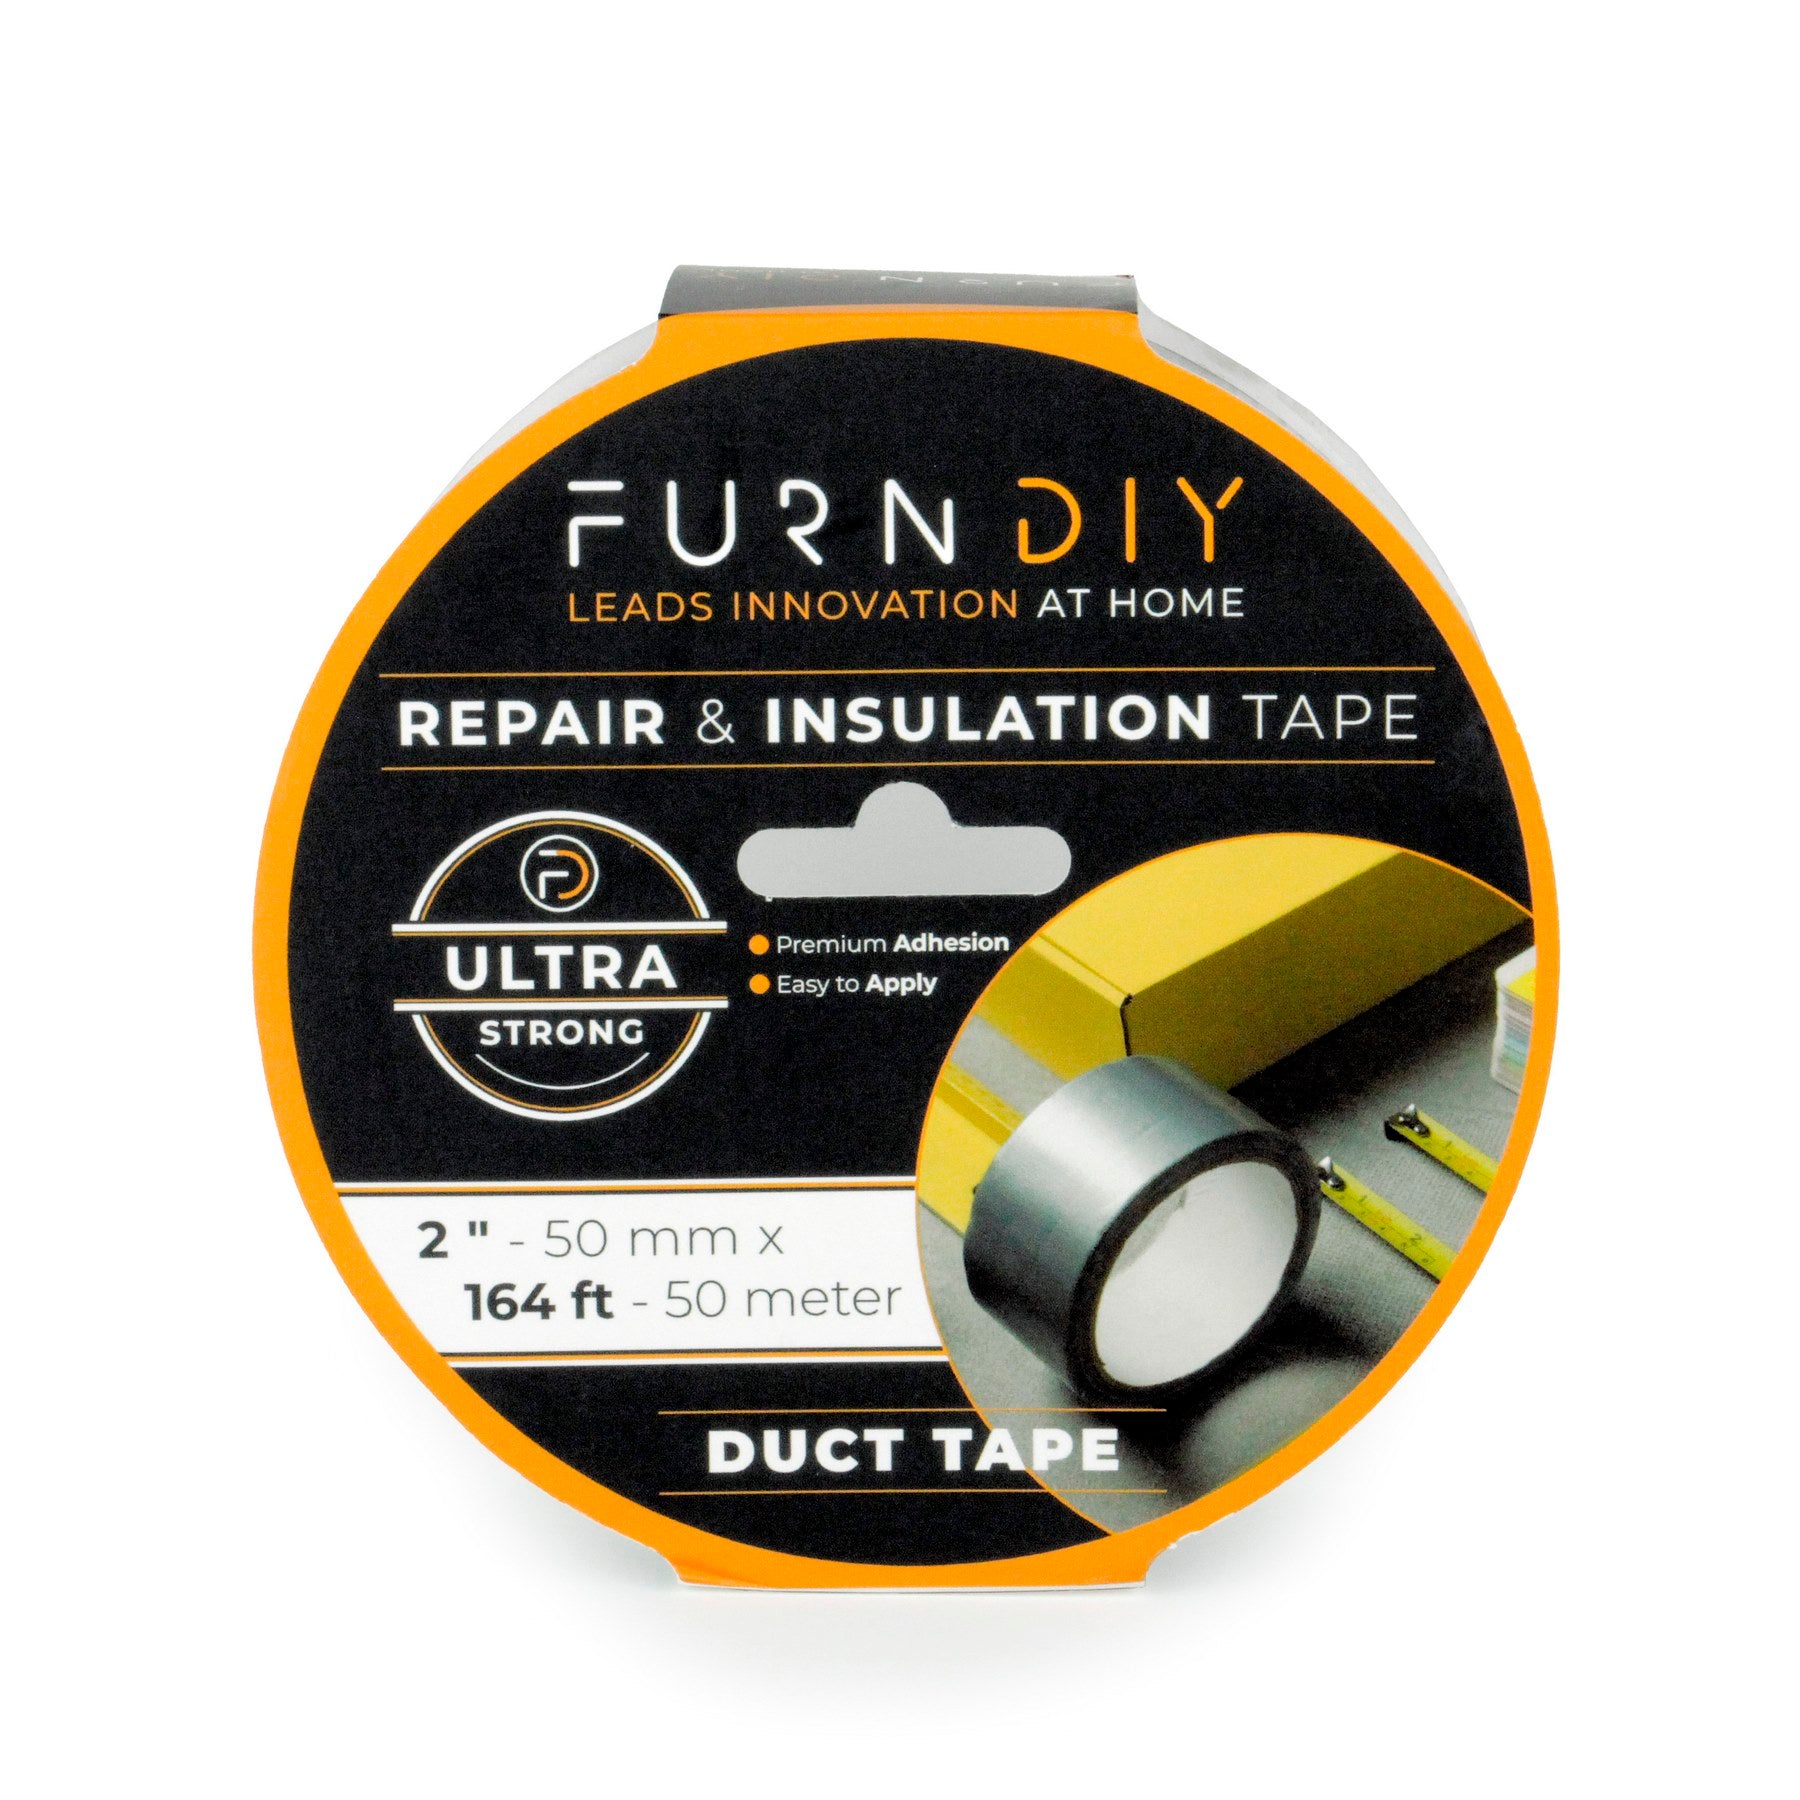 Furndiy Duct Tape, Heavy Duty Repair Tape, High Temperature Sealing, Patching HVAC, Insulation, Airproof